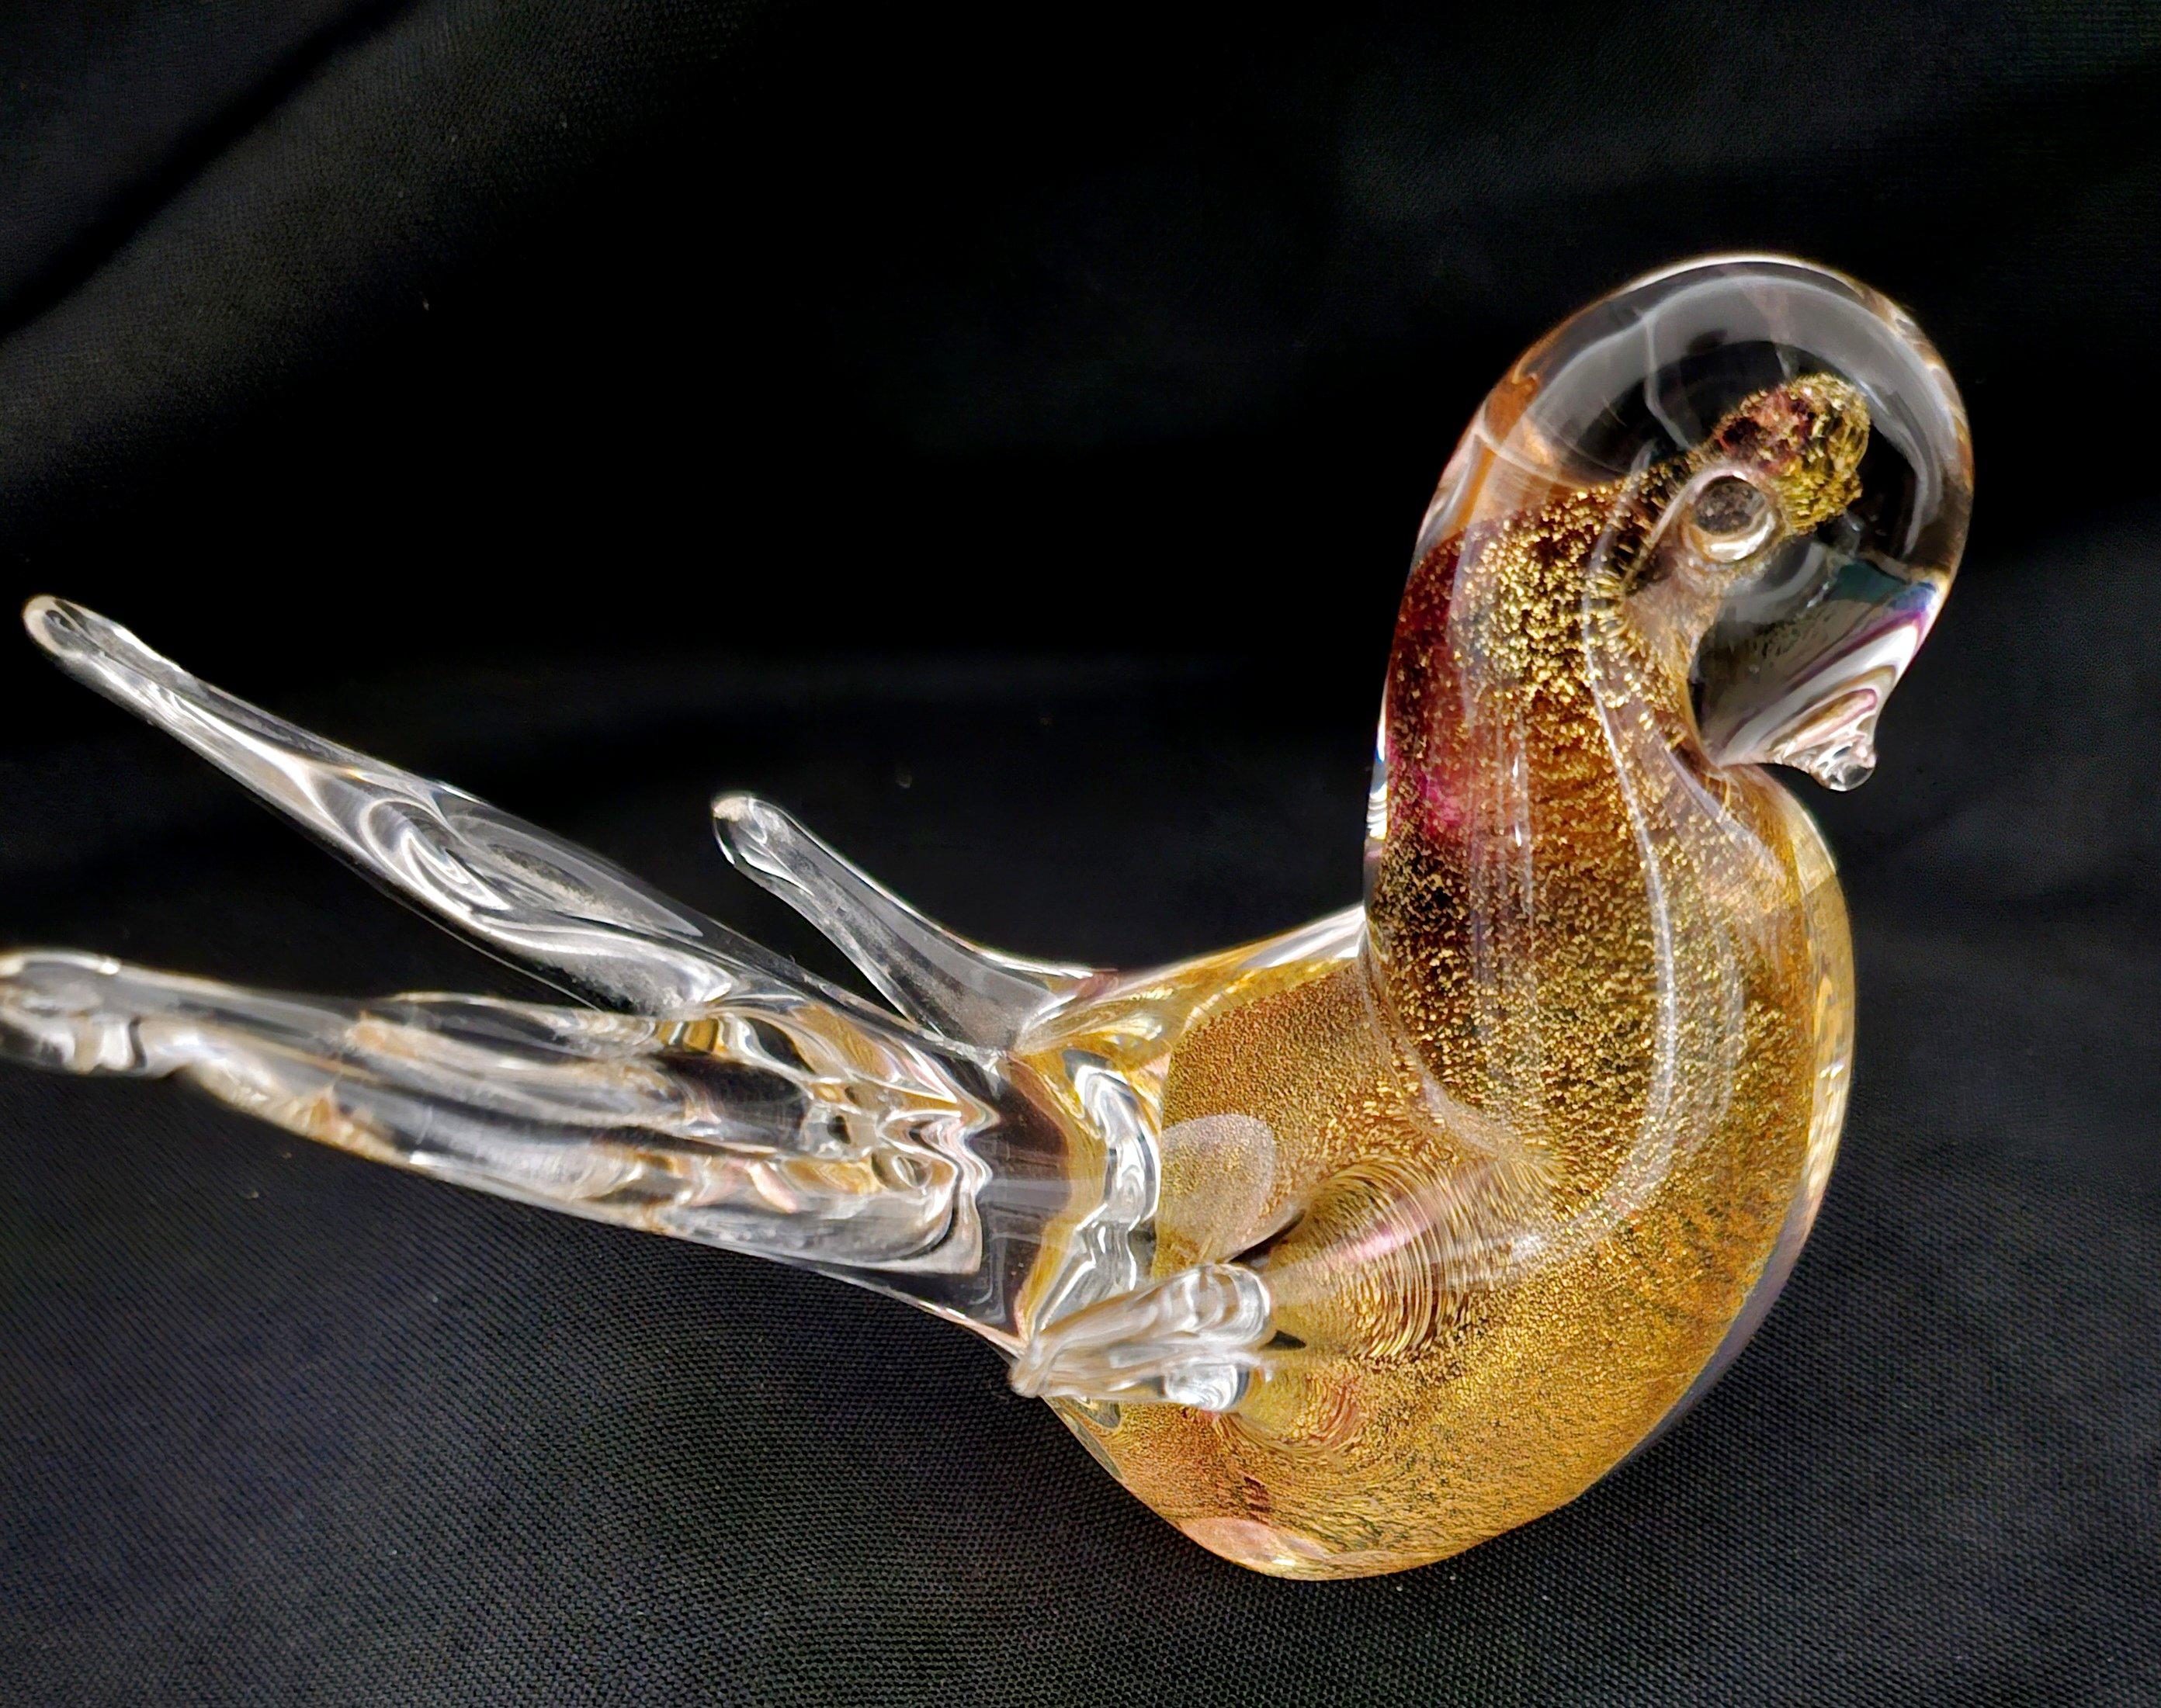 Vintage Murano Glass Bird with Gold Polveri, by Rubelli

A pretty little bird infused with gold, by the Murano glass artist Giampaolo Rubelli. 
Great vintage condition!

The colors tend to look richer on dark background than on light/white